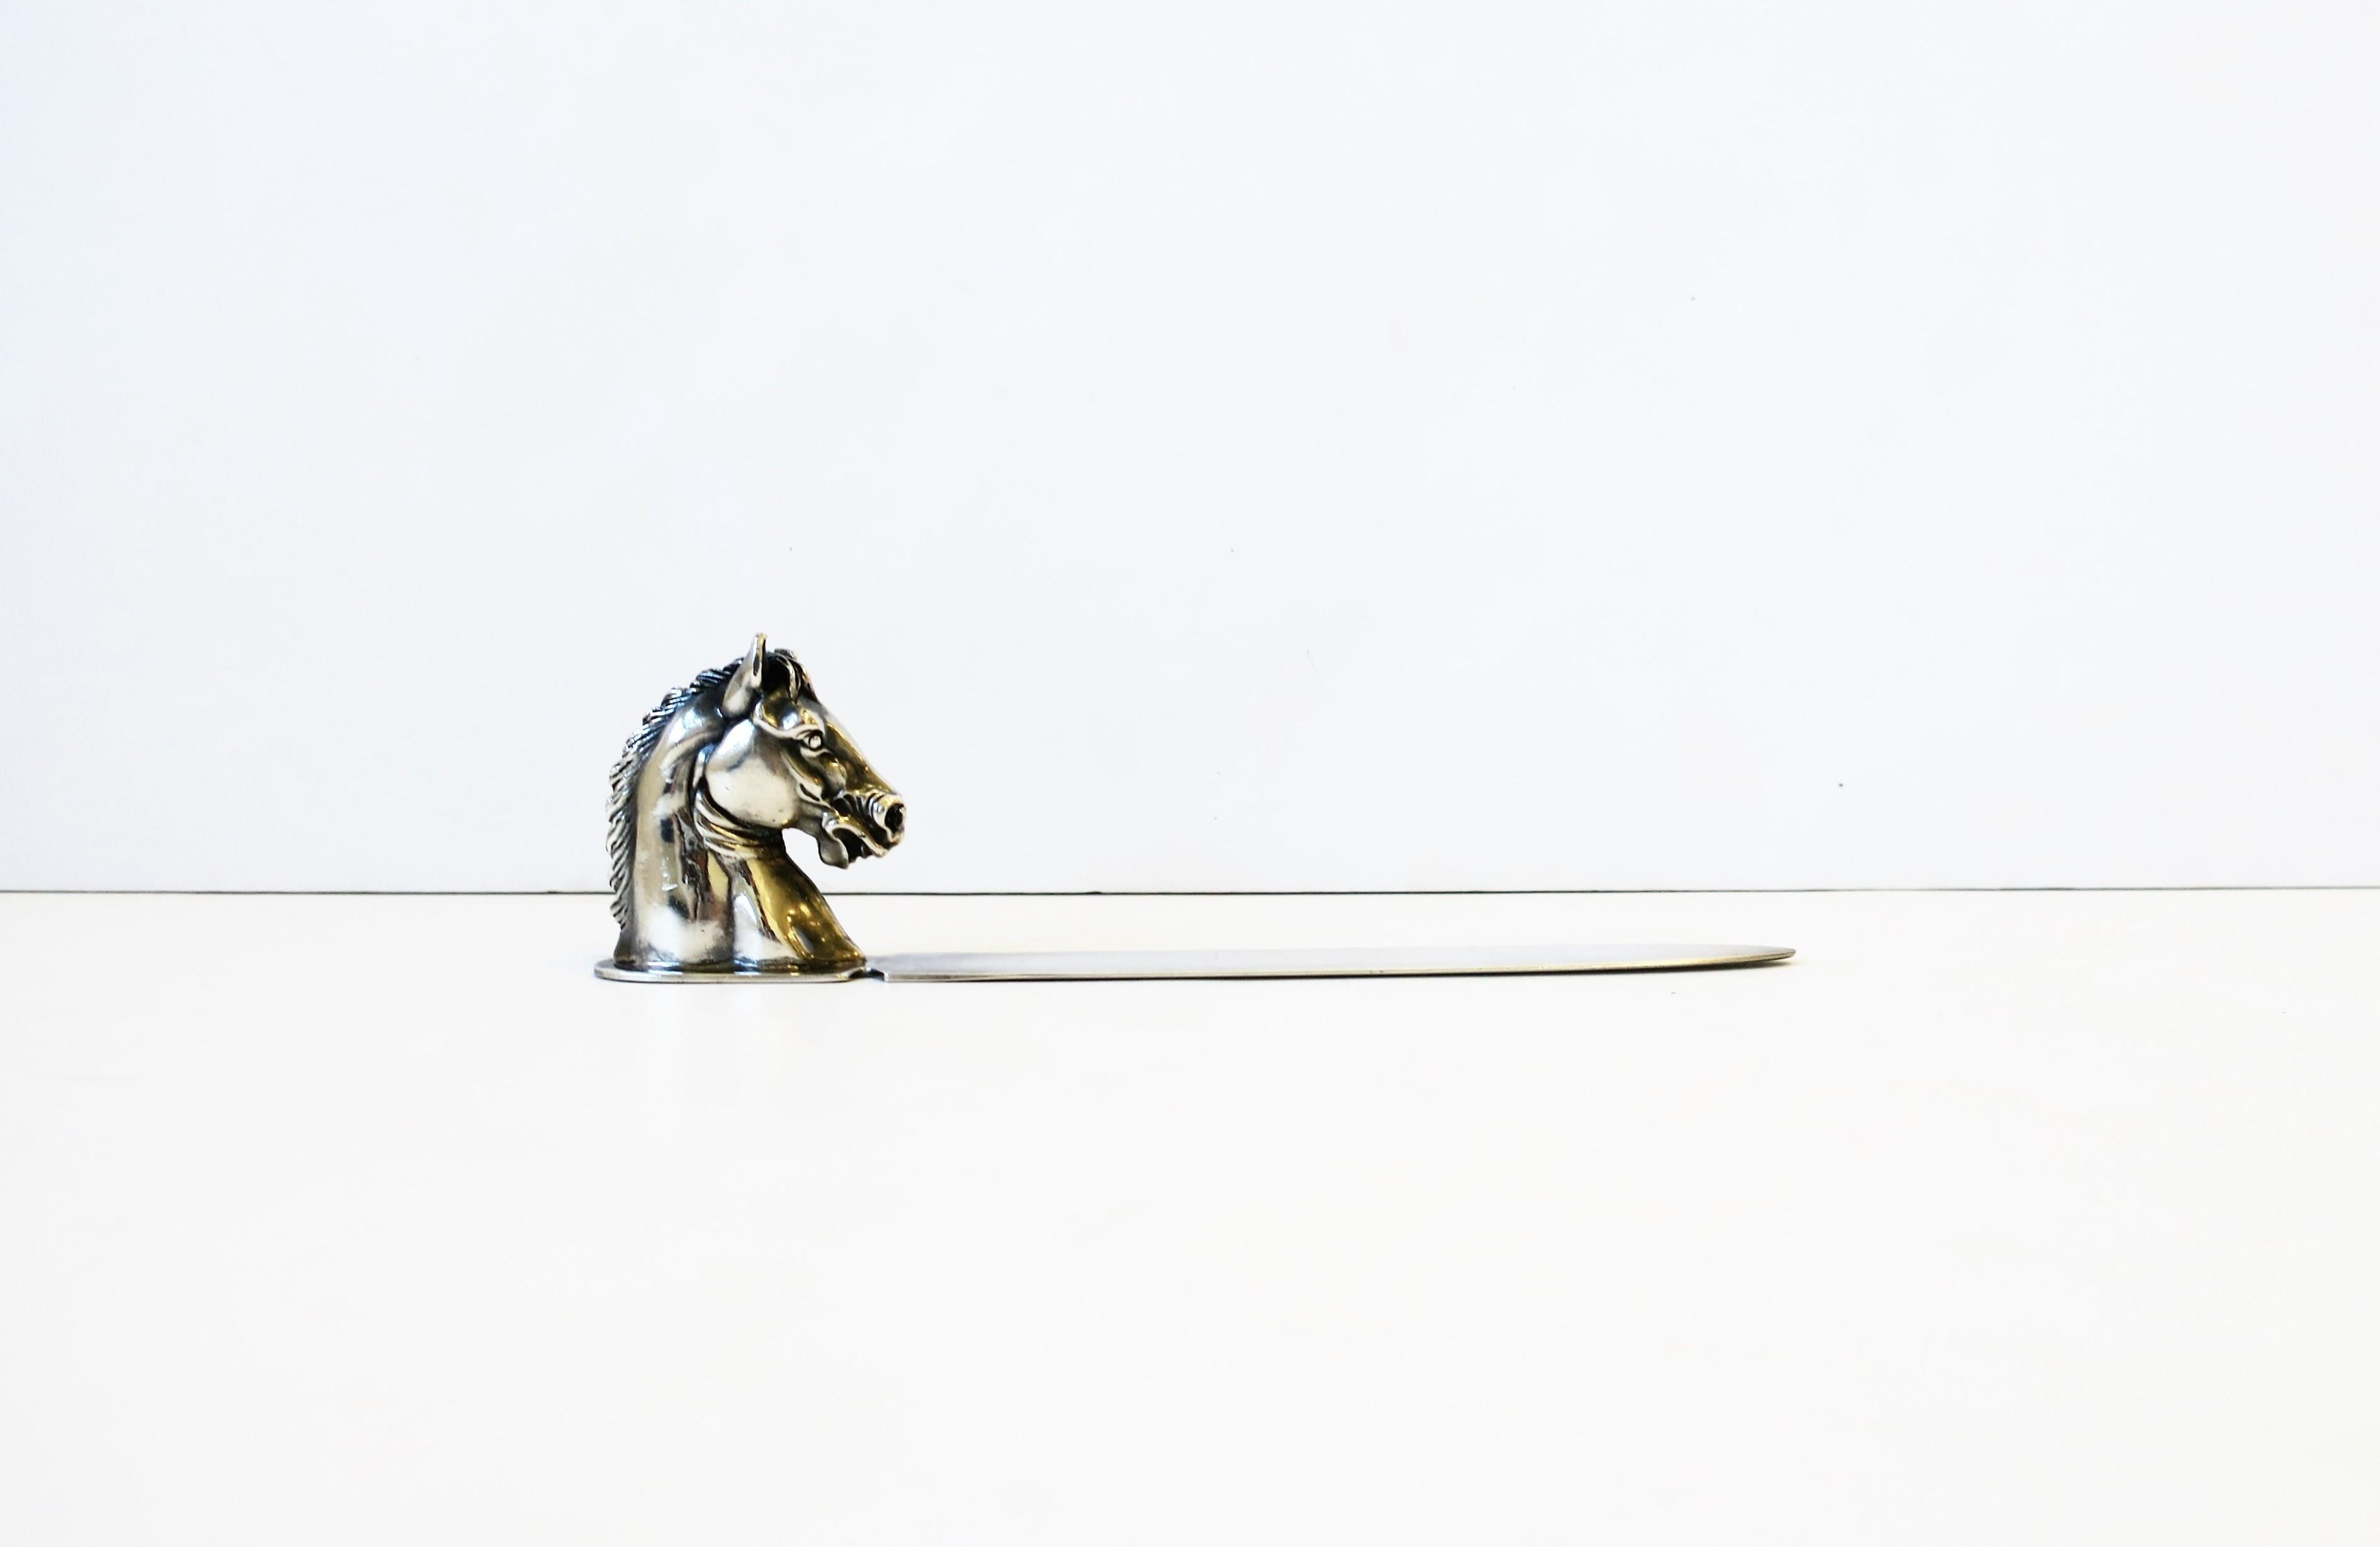 A substantial sterling silver plate letter opener with horse head handle made by Reed & Barton, circa mid-20th century, USA. A great desk, office, library, etc., accessory. With maker's mark on underside as shown in images #11 and 12. Dimensions: 1